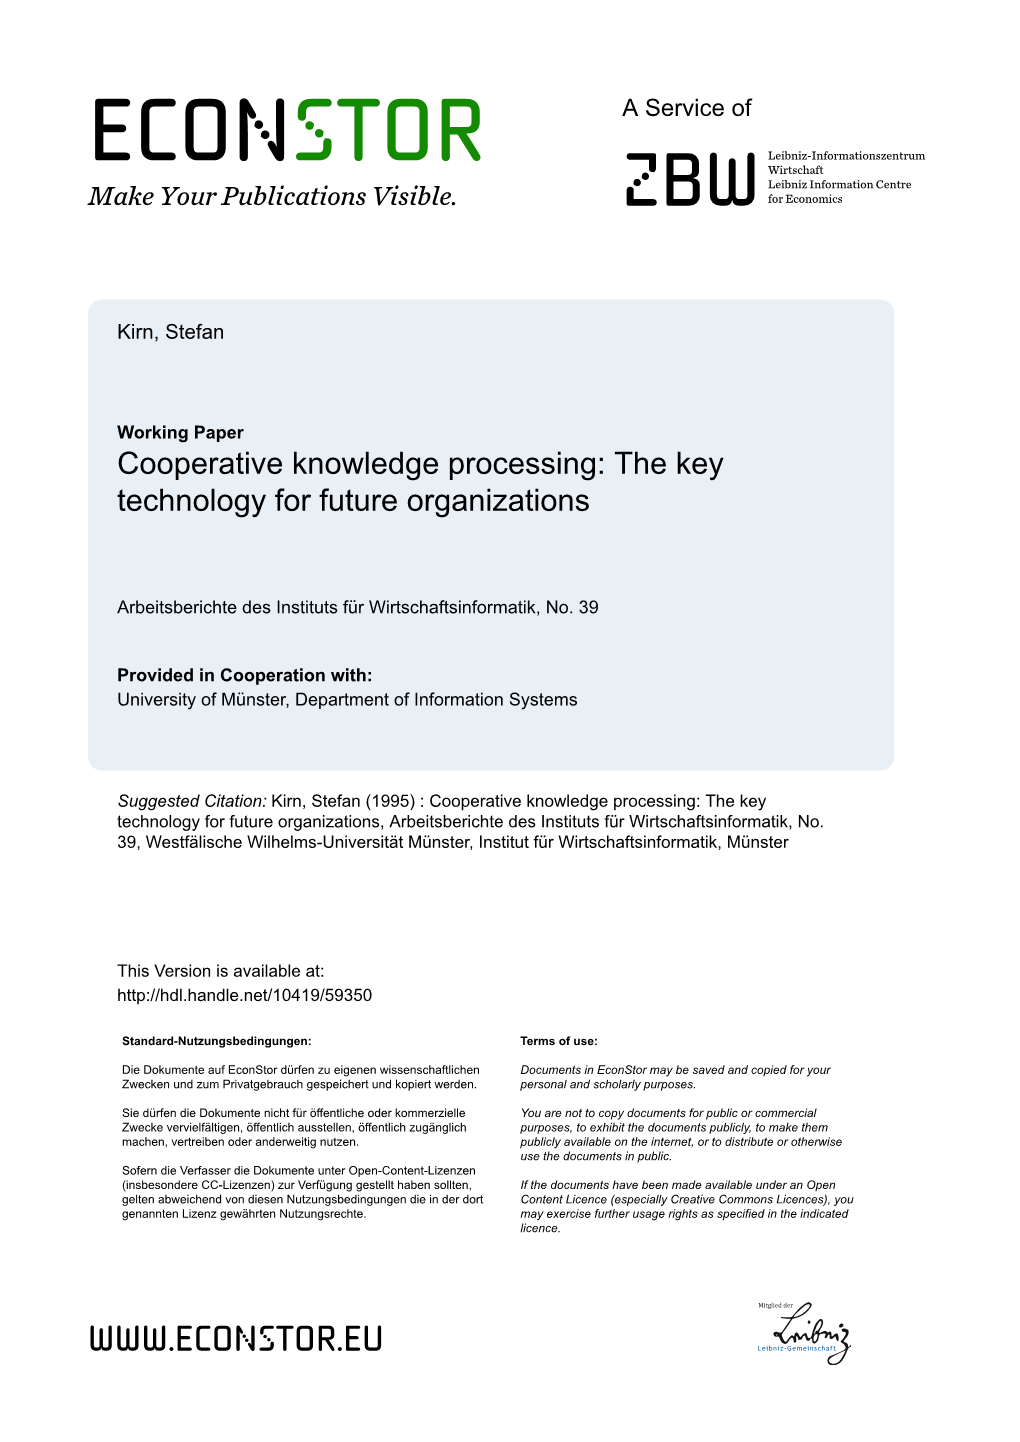 Cooperative Knowledge Processing: the Key Technology for Future Organizations